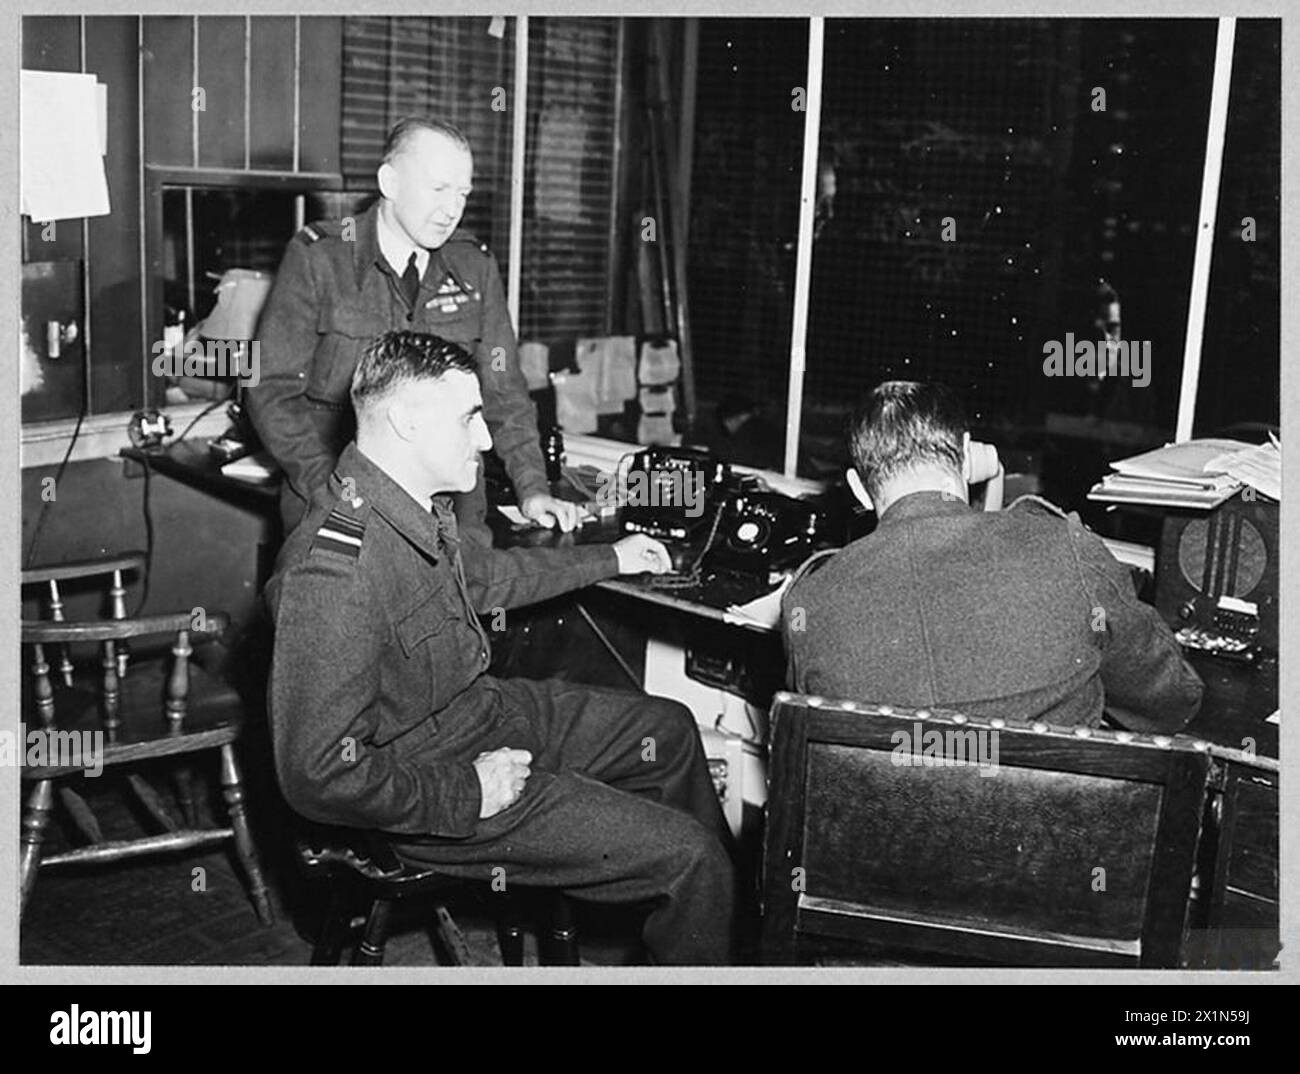 IN COASTAL COMMAND 'OPS' ROOM - Picture (issued 1944) shows - Air Vice Marshal B.E. Baker, CB., DSO., MC., AFC., Air Officer Commanding a Coastal Command Group [centre] with Air Commodore N.H. D'Aeth, CBE., the Senior Air Staff Officer [extreme left], Royal Air Force Stock Photo